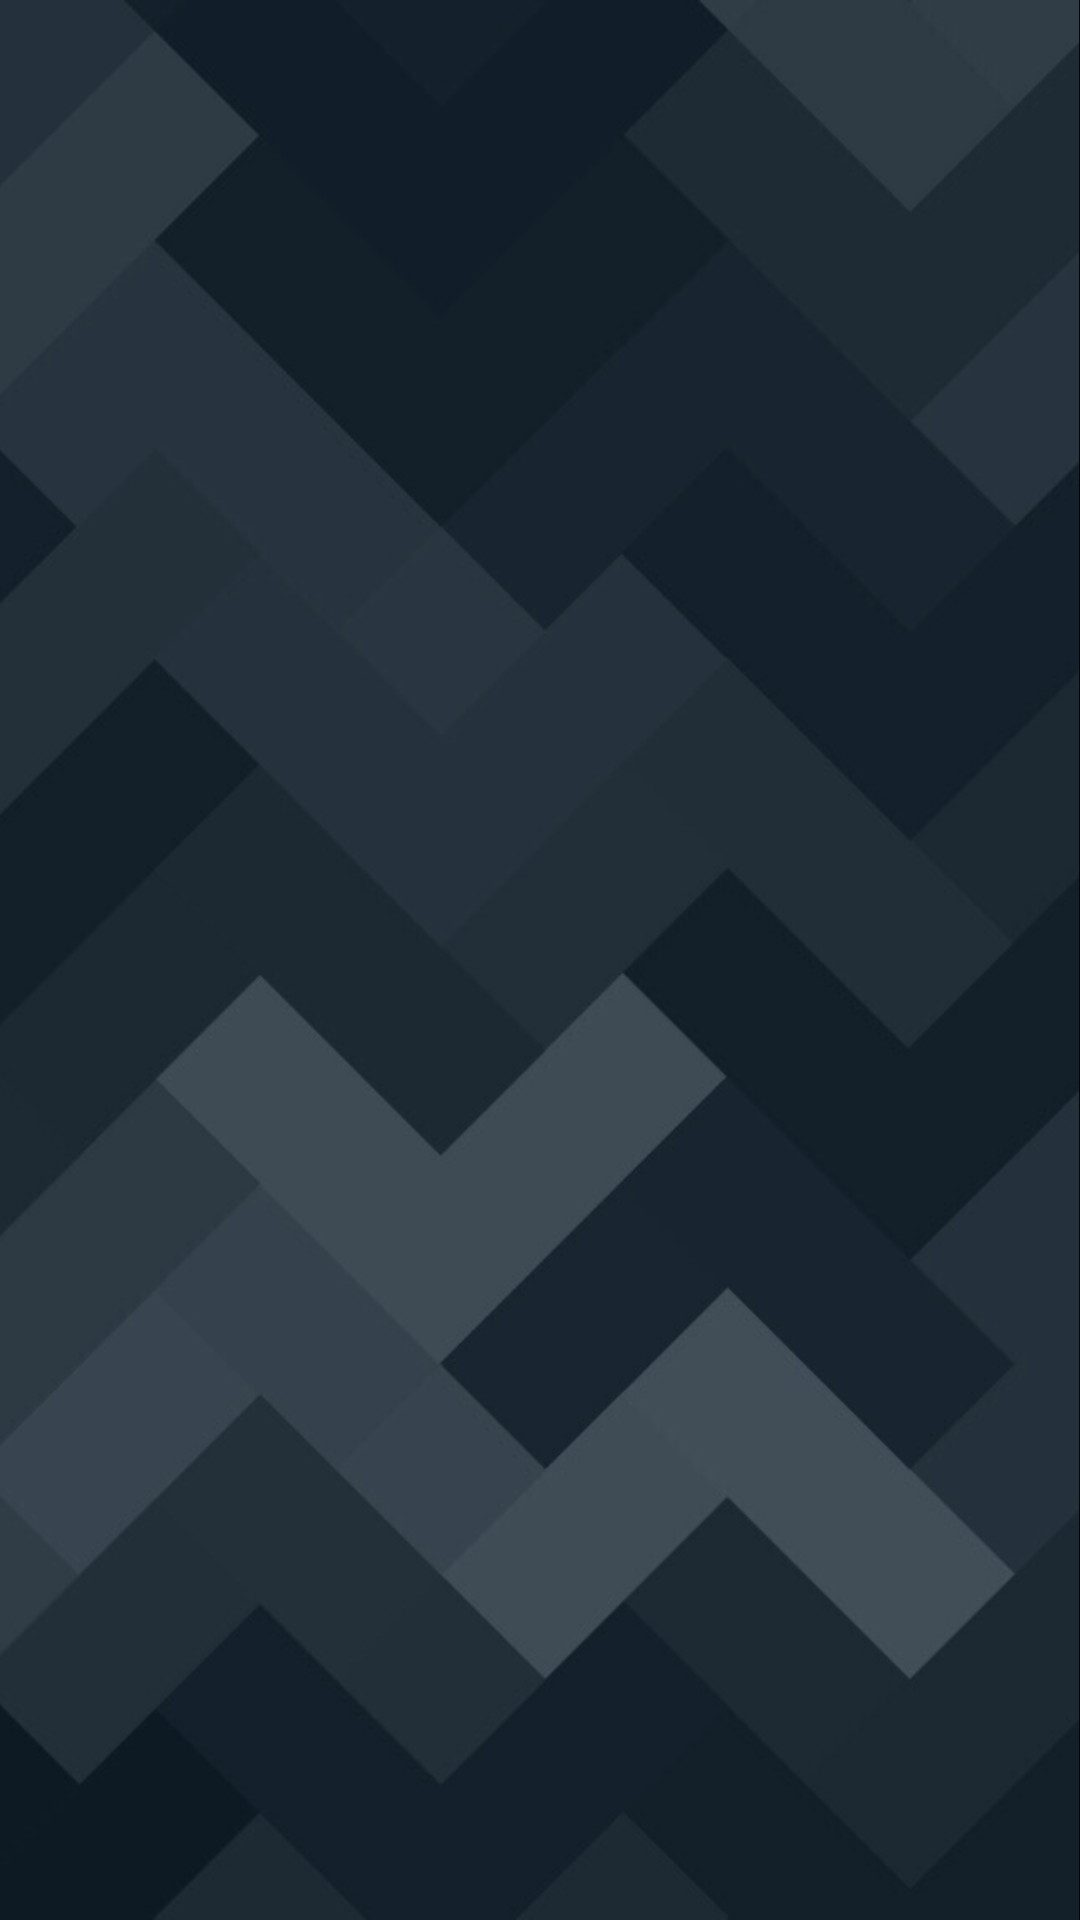 1080x1920 Download Simple Black & Grey Shapes 1080 x 1920 Wallpapers - 4607359 -  minimal simple black grey pattern shape | mobile9